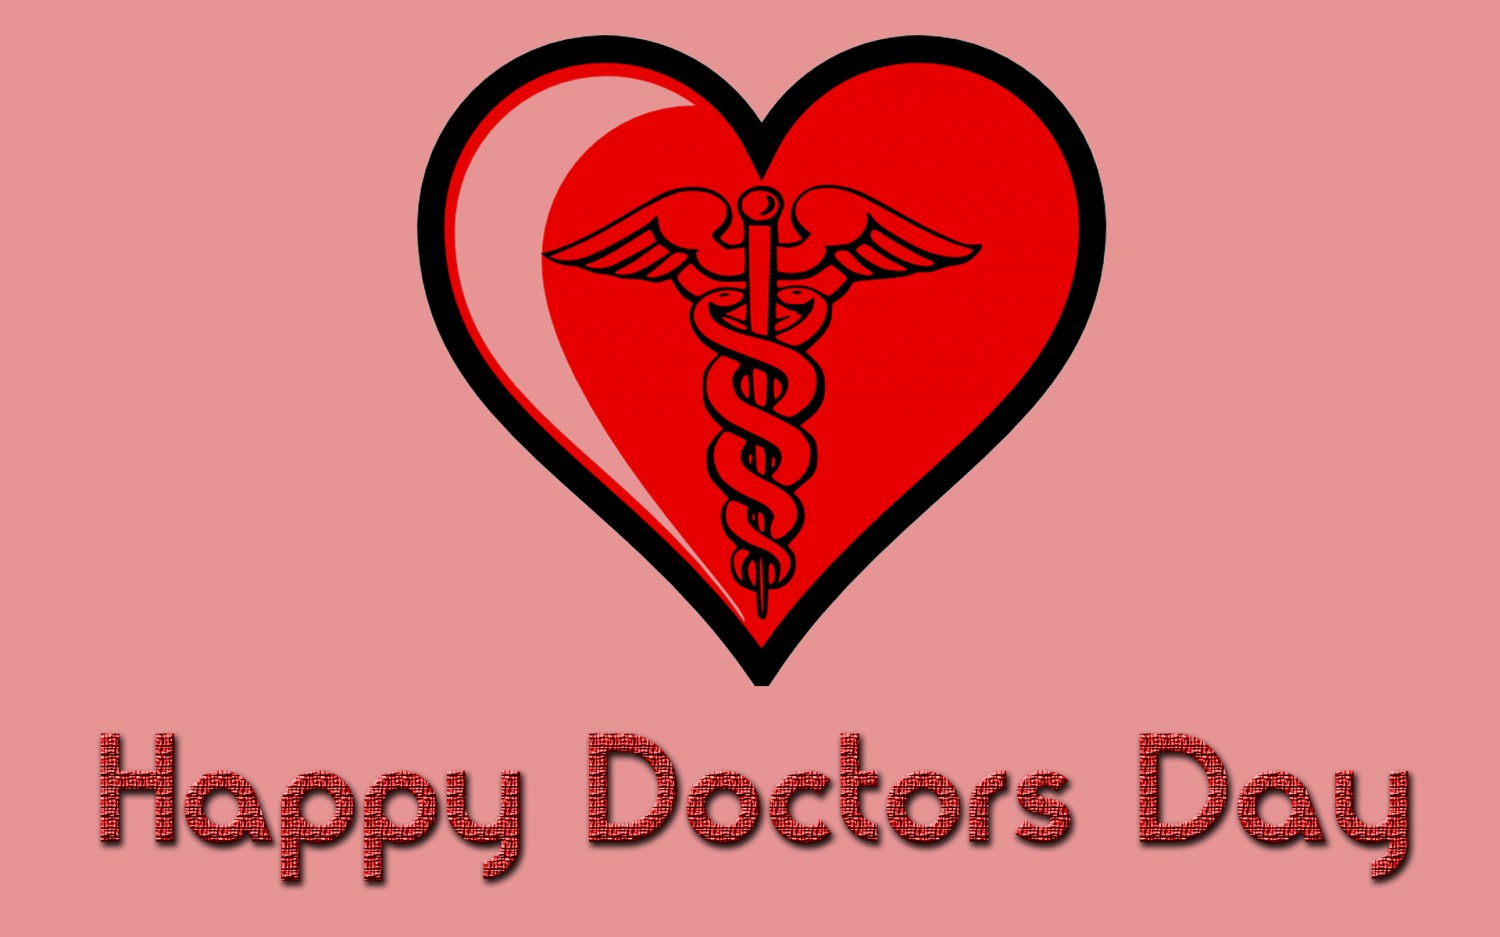 Share Beautiful Doctors Day Image on 1st July 2019 for remarking this day